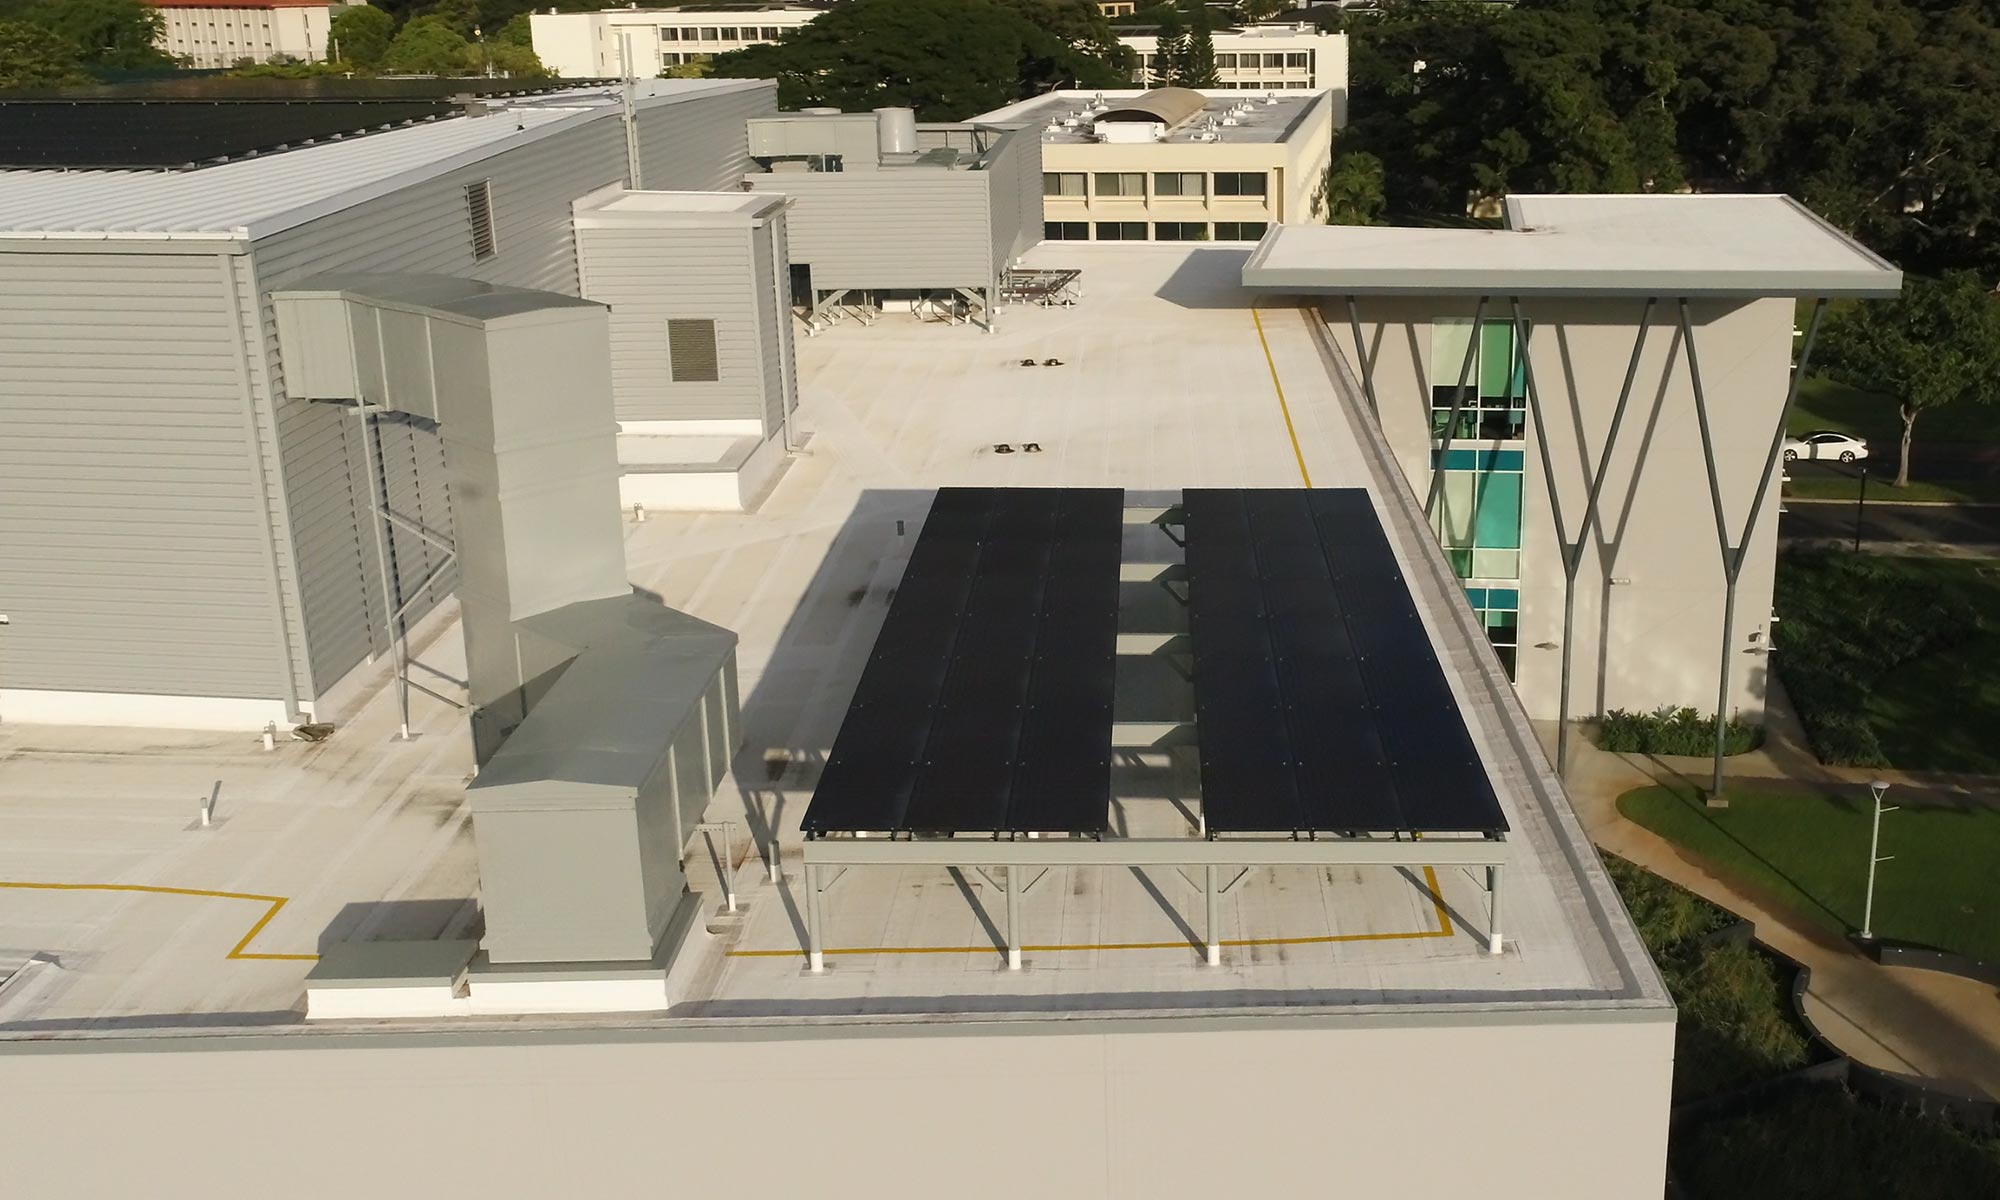 Solar panels on the roof of the Life Sciences Building